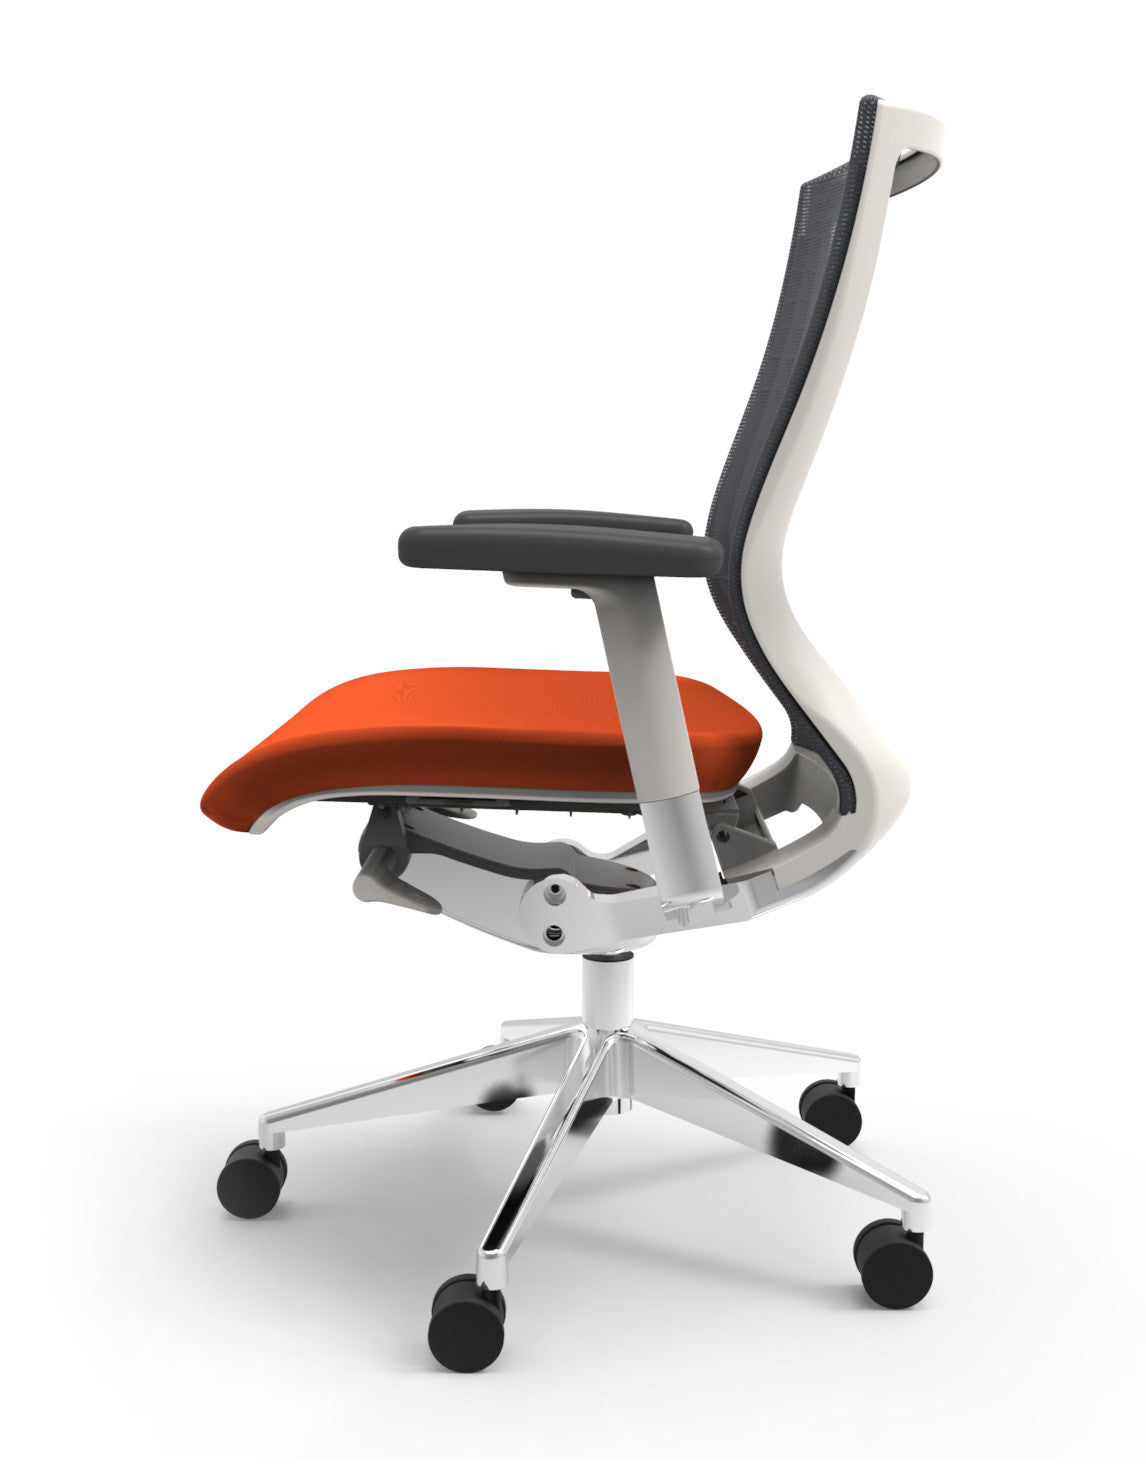 Blanco Office Chair with Persimmon Seat Option